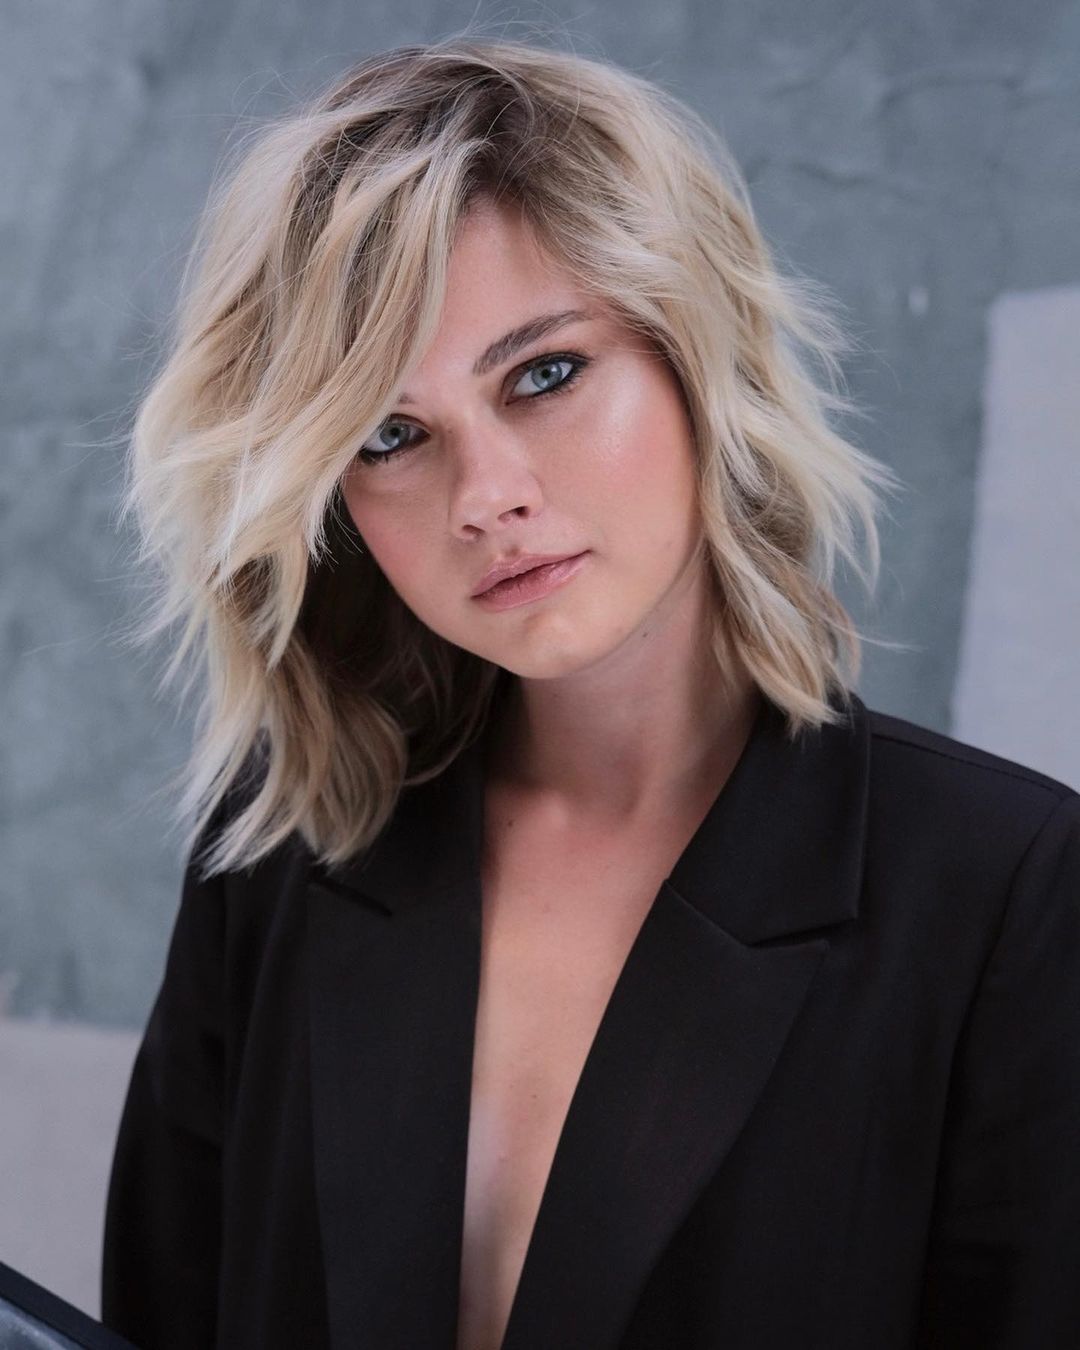 Torn haircuts for blonde hair: 16 interesting ideas for brave beauties